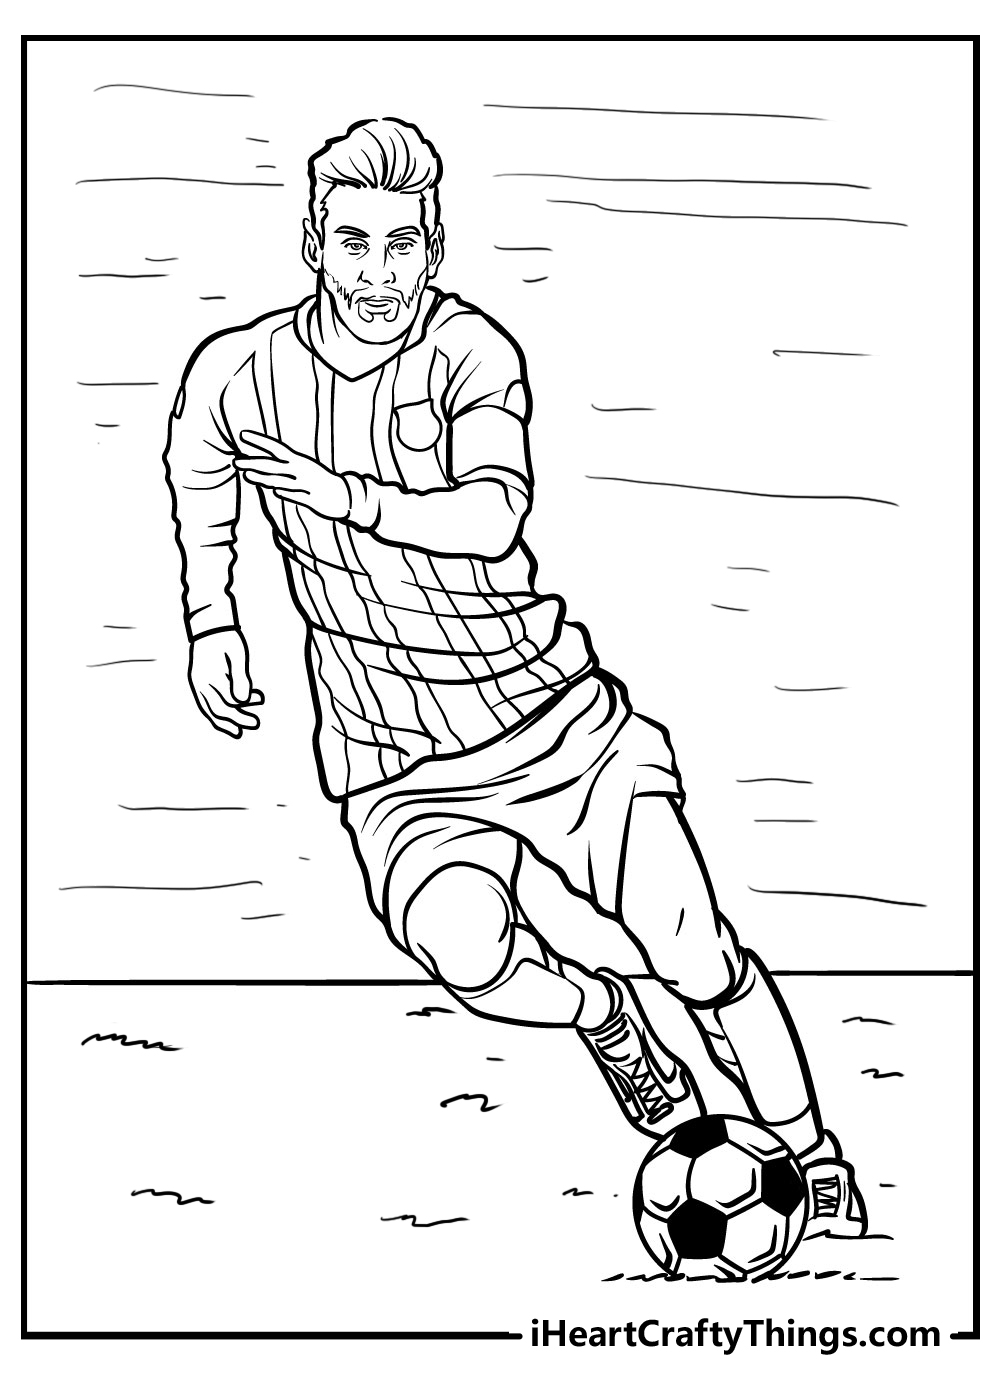 Footballers Coloring Pages - Coloring Nation